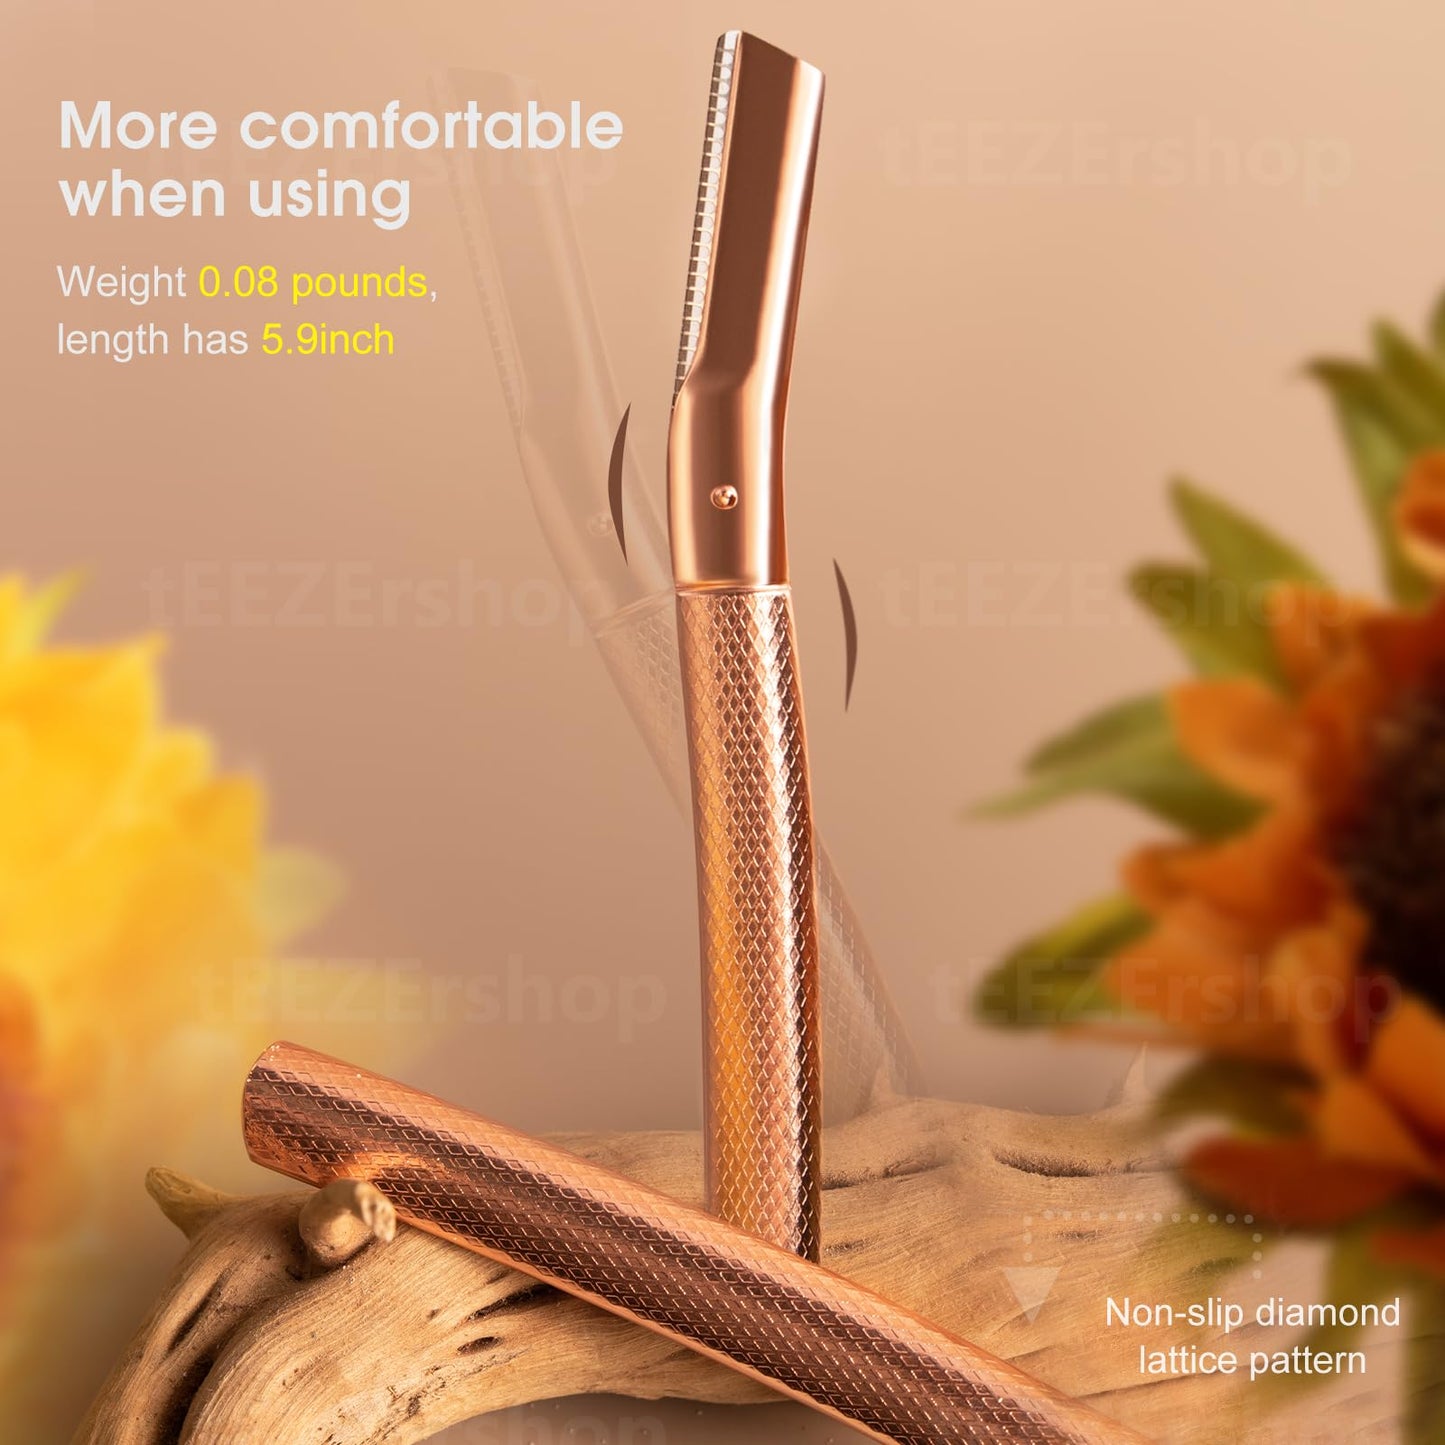 tEEZErshop Dermaplane Razor for Women Face with 20PCS Blades,Professional Facial Razors for Peach Fuzz and Eyebrow Hair Removal,Stainless Steel Multipurpose Face Shavers with Gift Box-Gold